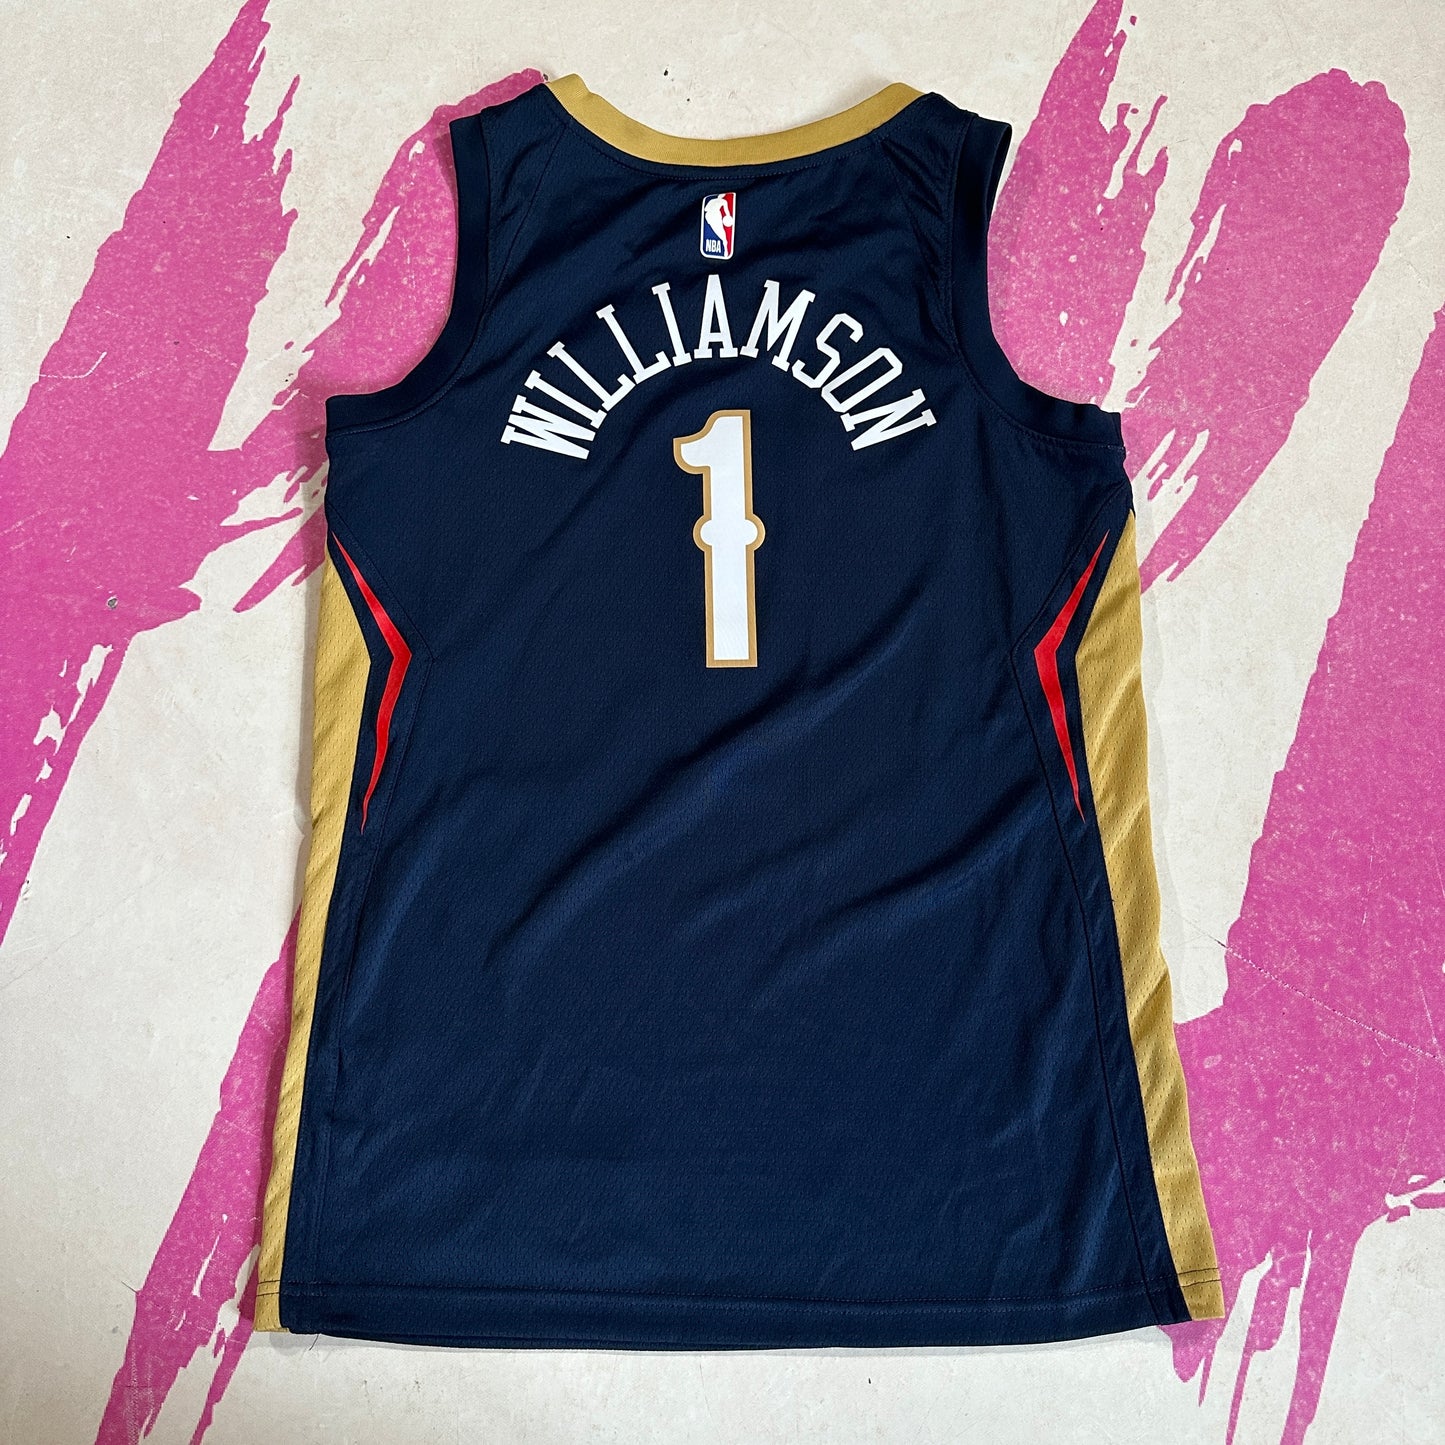 Zion Williamson New Orleans Pelicans Icon Edition Nike Jersey